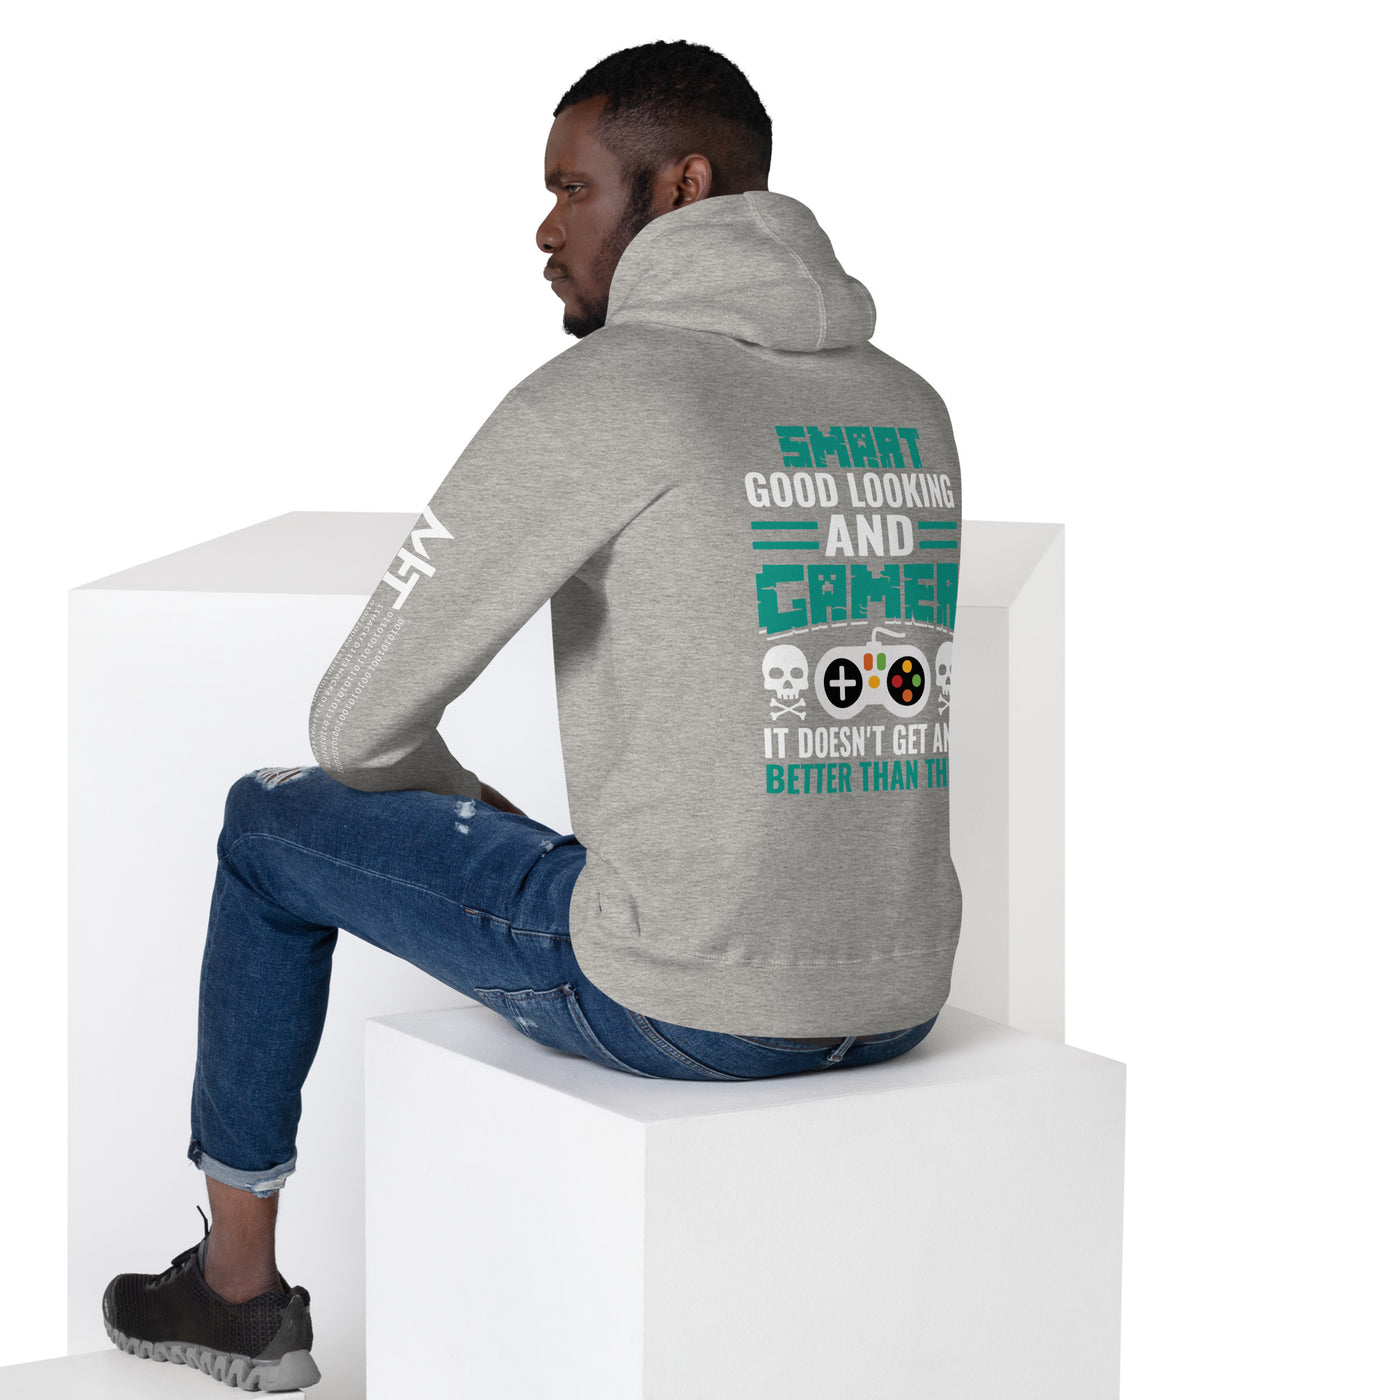 Smart Good Looking and Gamer; It Doesn't Get Any Better than this - Unisex Hoodie ( Back Print )